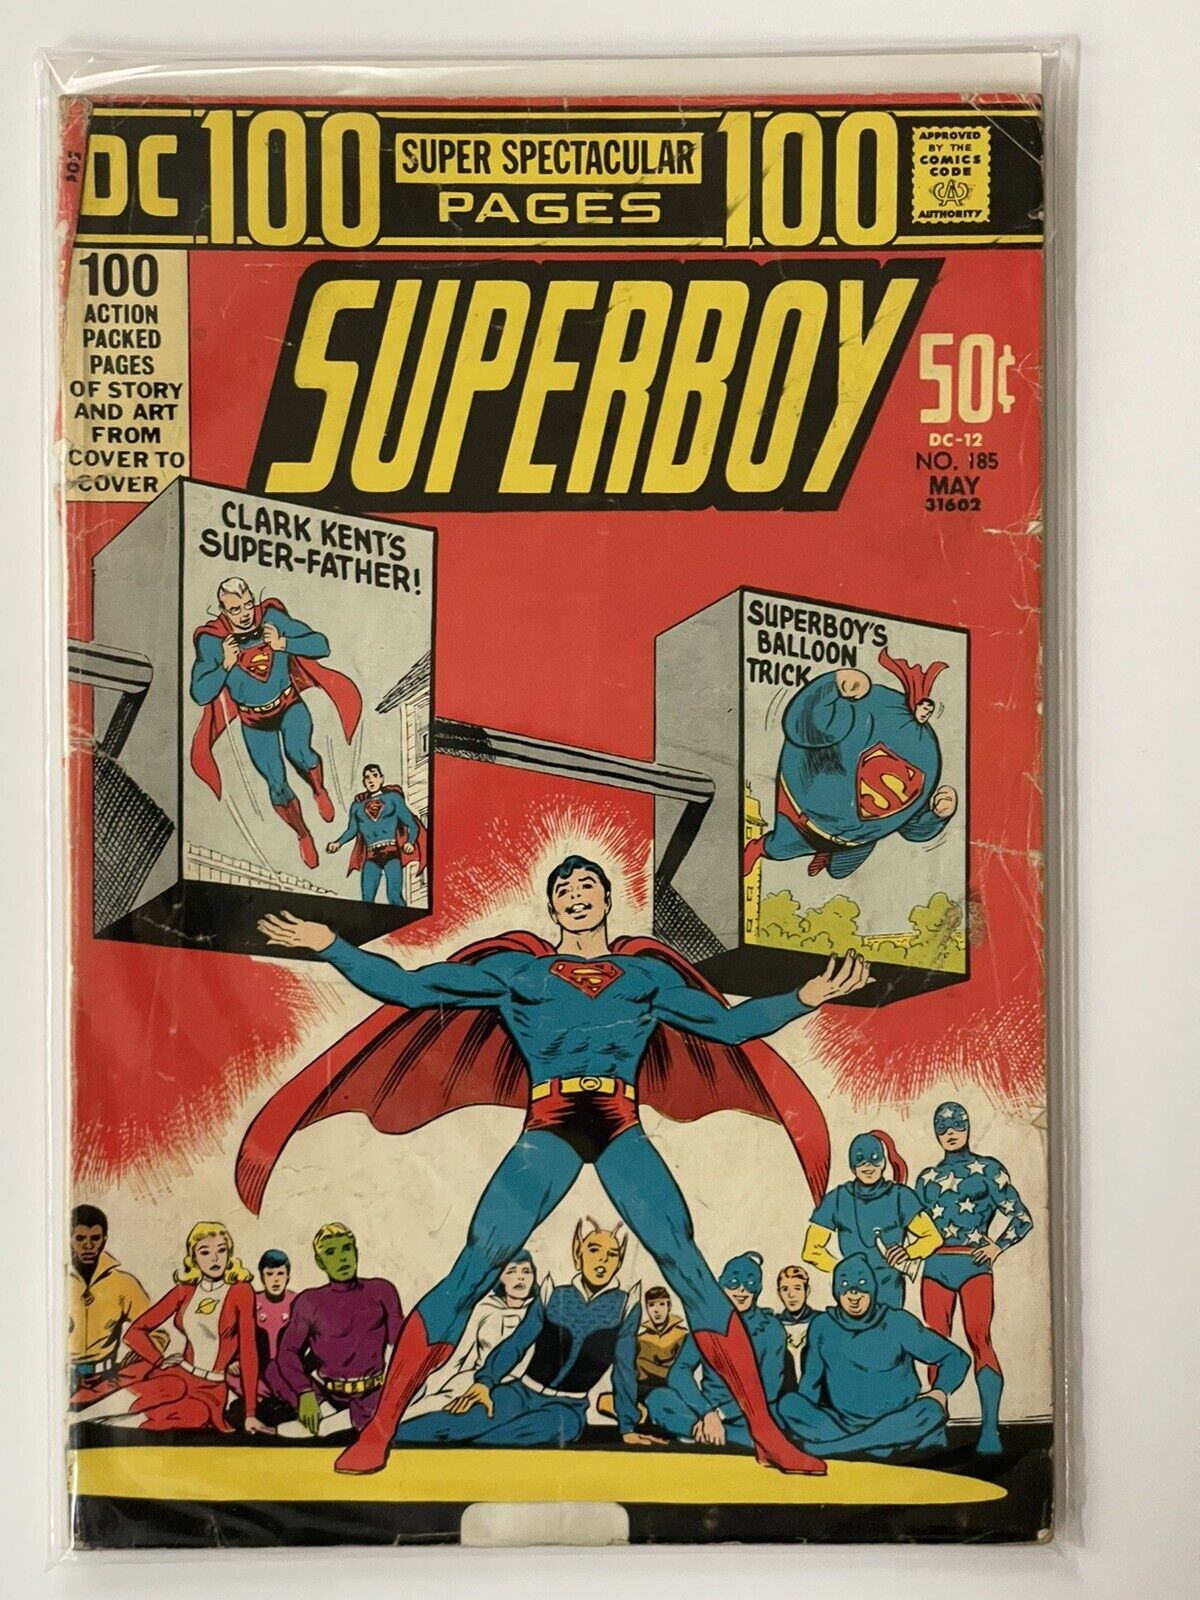 DC Super Spectacular SUPERBOY #185 May 1972💥 100 Pages DC-12💥